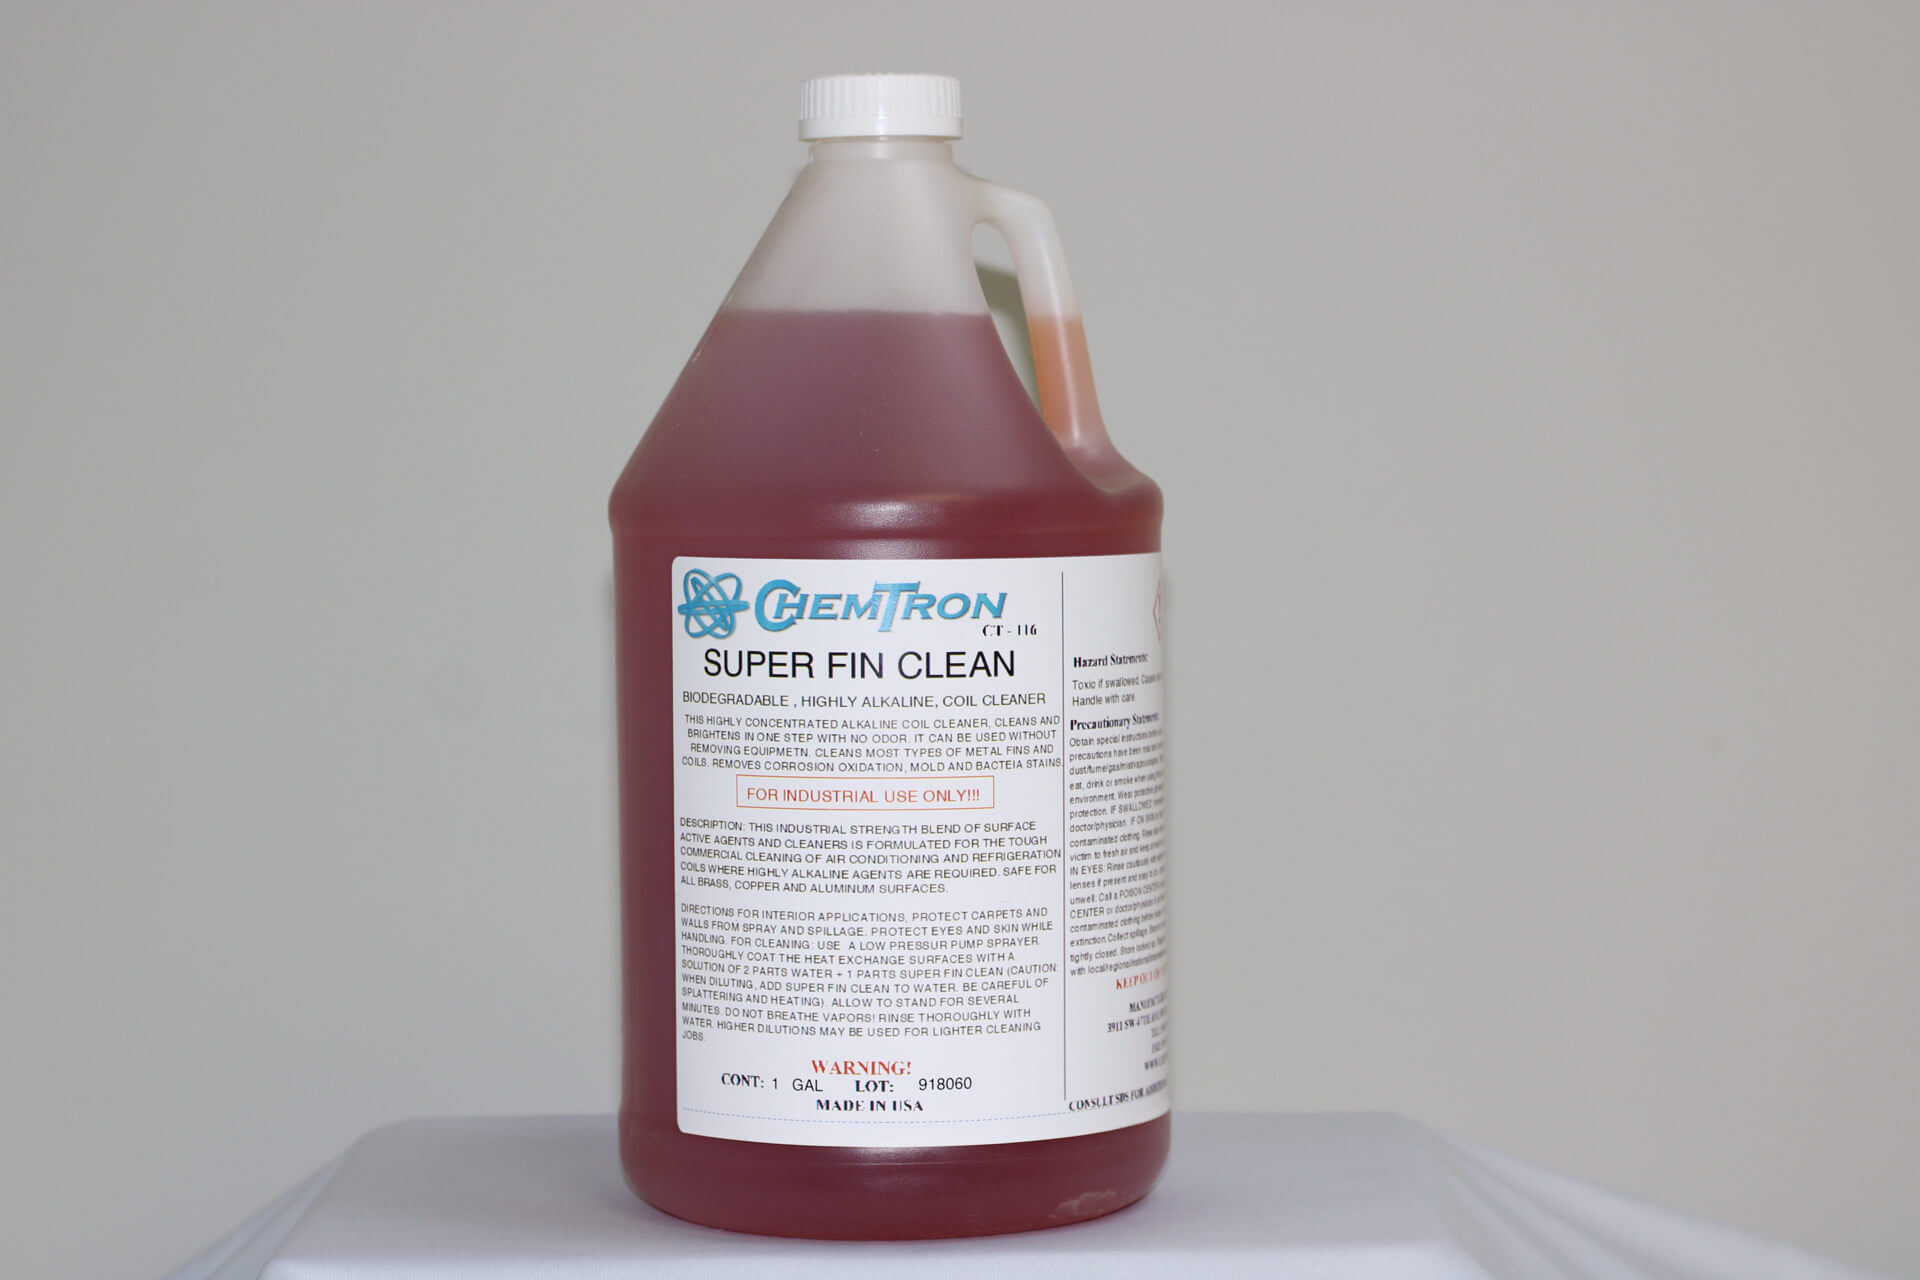 cleanx coil cleaner